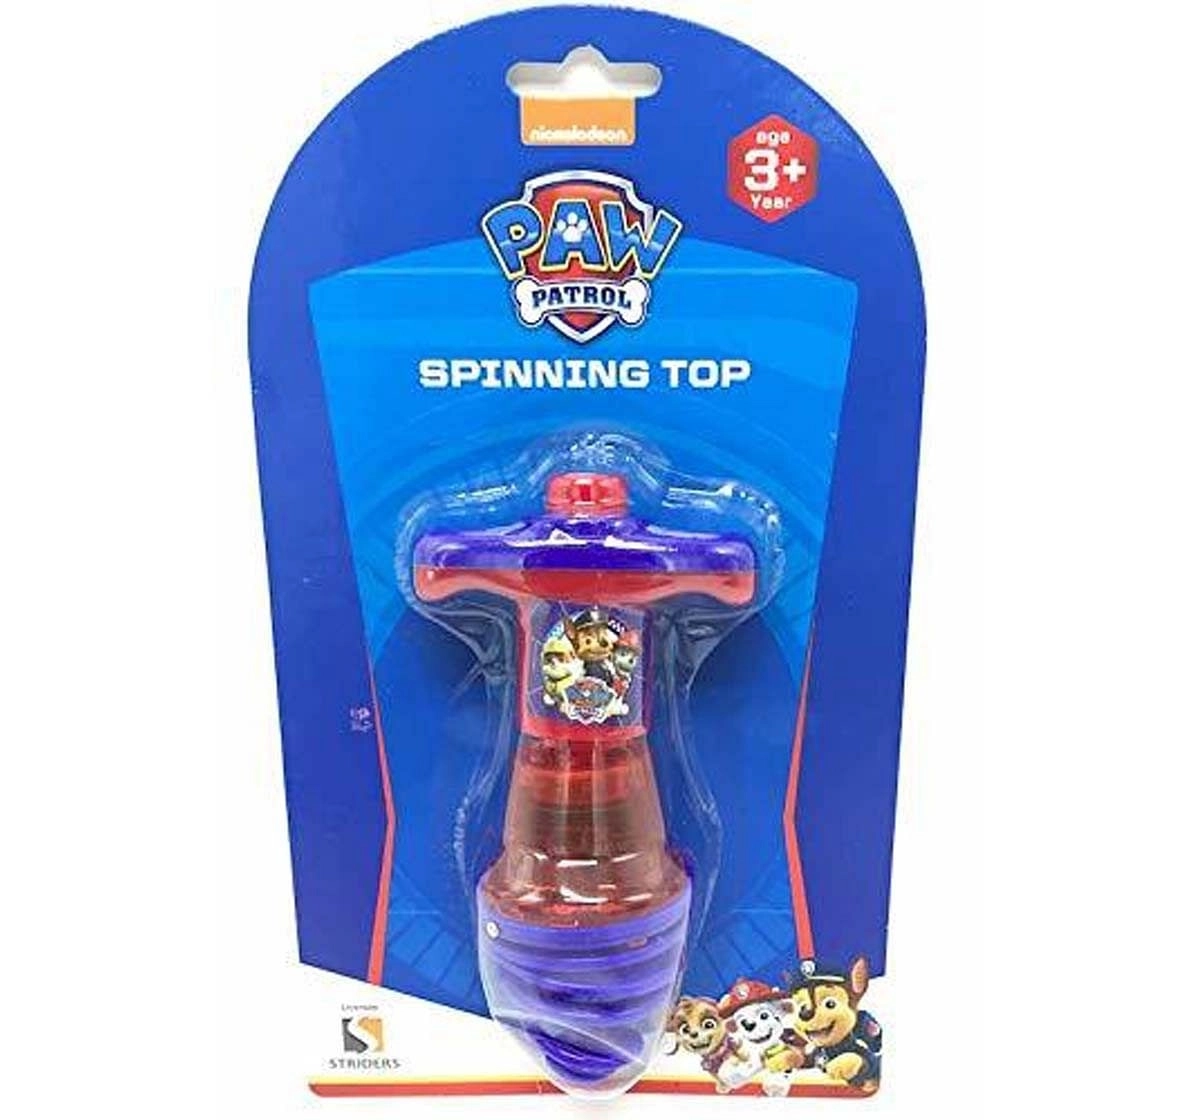 Paw Patrol Flashing & Spinning Top Impulse Toys for Kids Age 3Y+